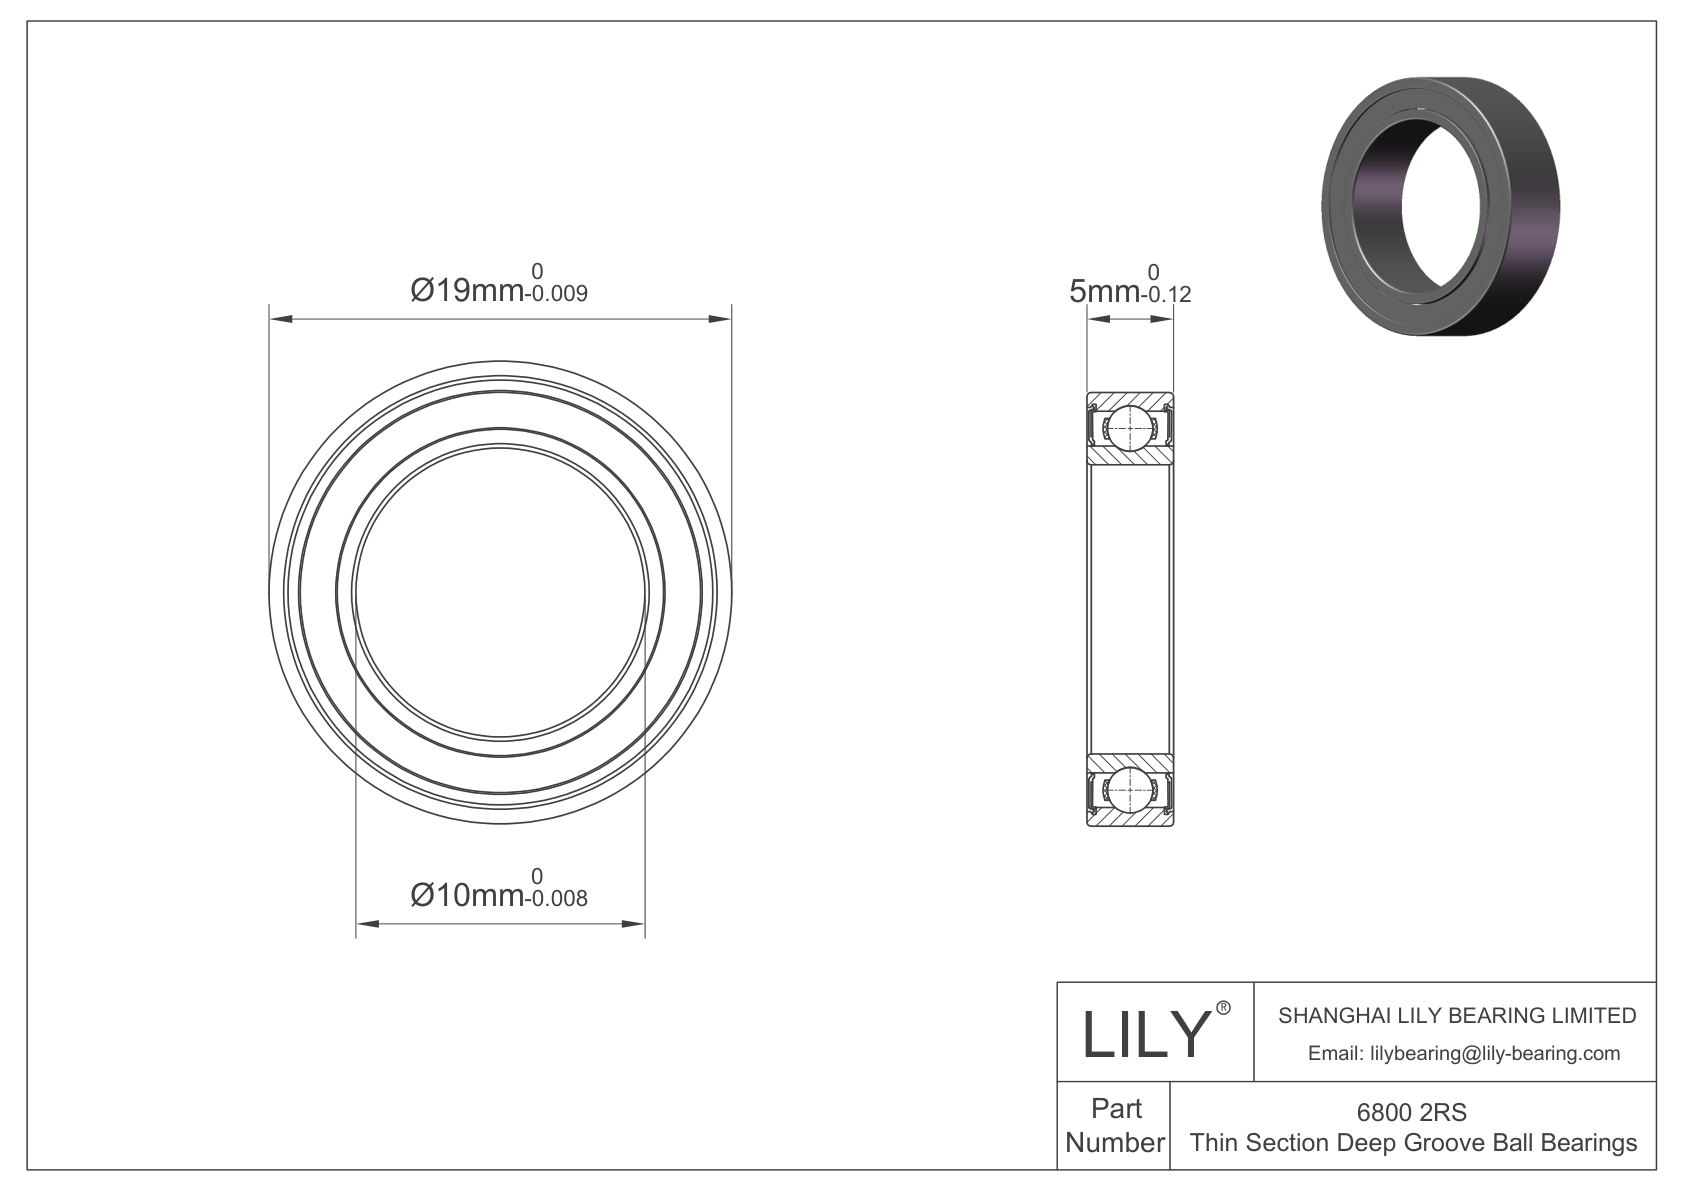 LILY-BST680040-30 Outsourcing POM bearings cad drawing